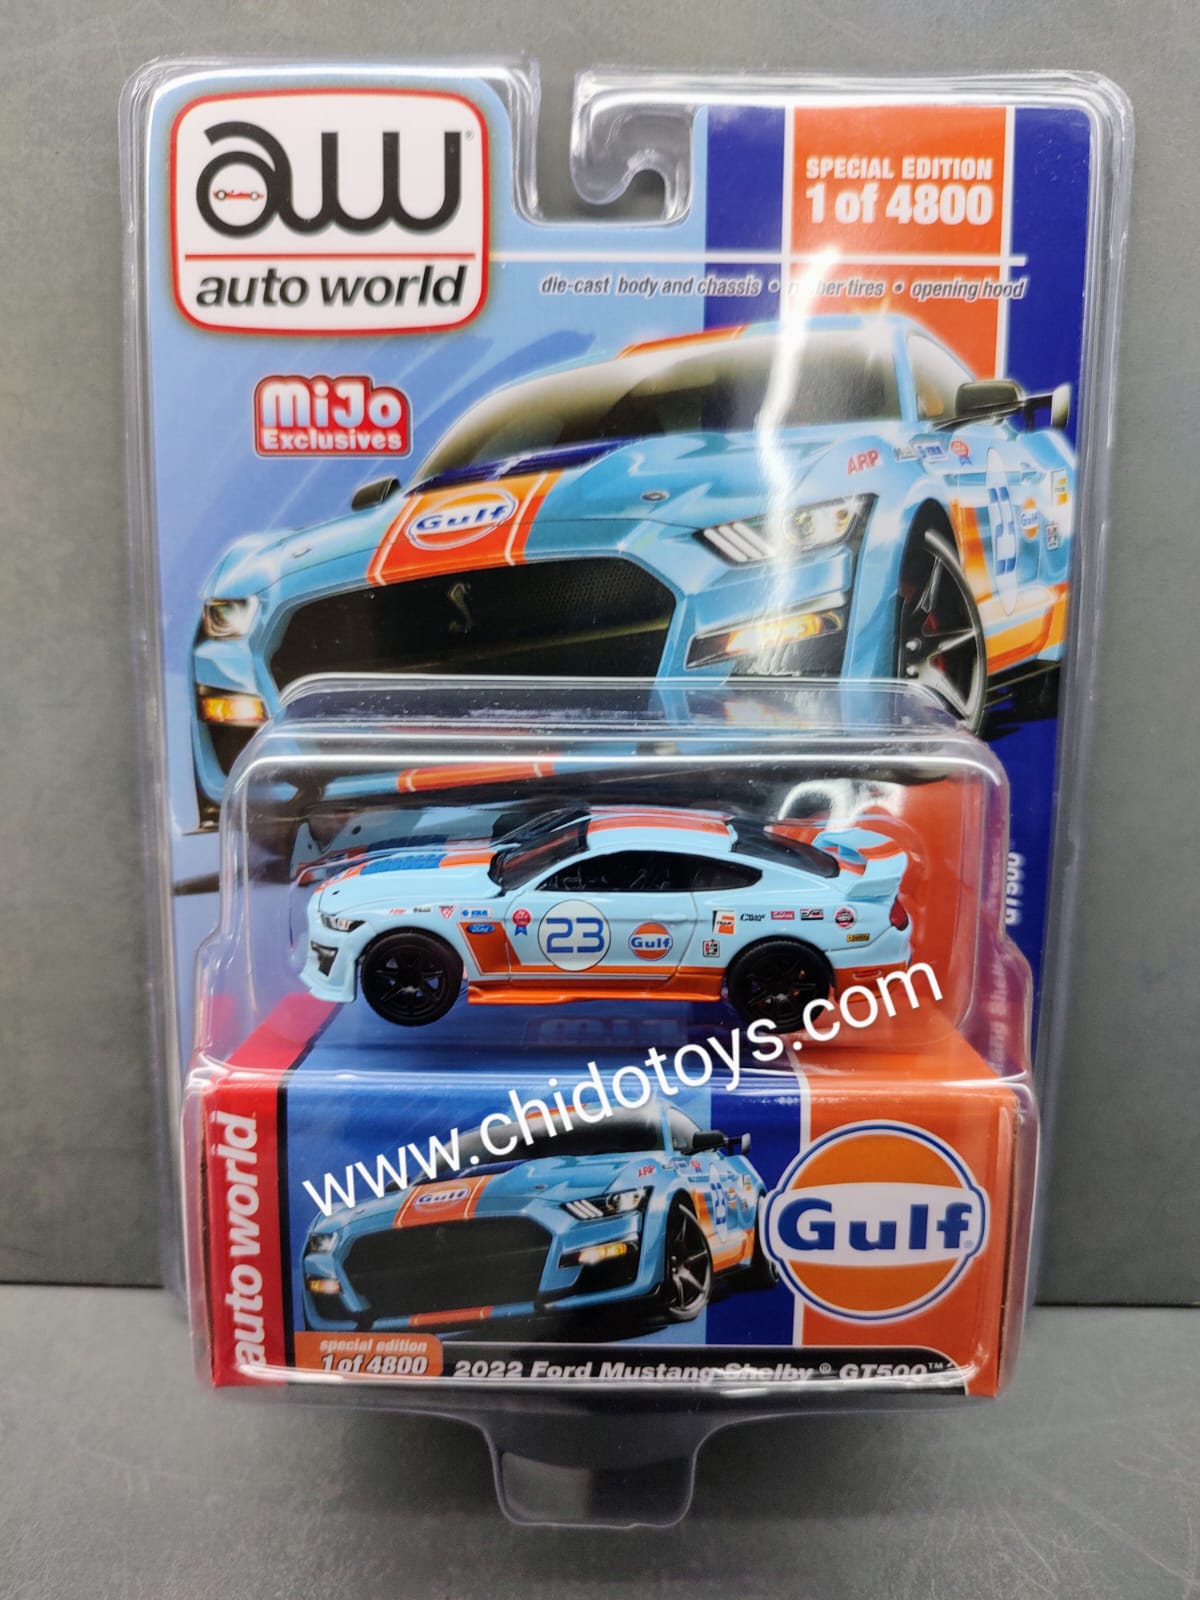 Auto a escala marca Auto World, Modelo Ford Mustang Shelby GT500, 2022, GULF Limited 4,800 piezas - Chido Toys